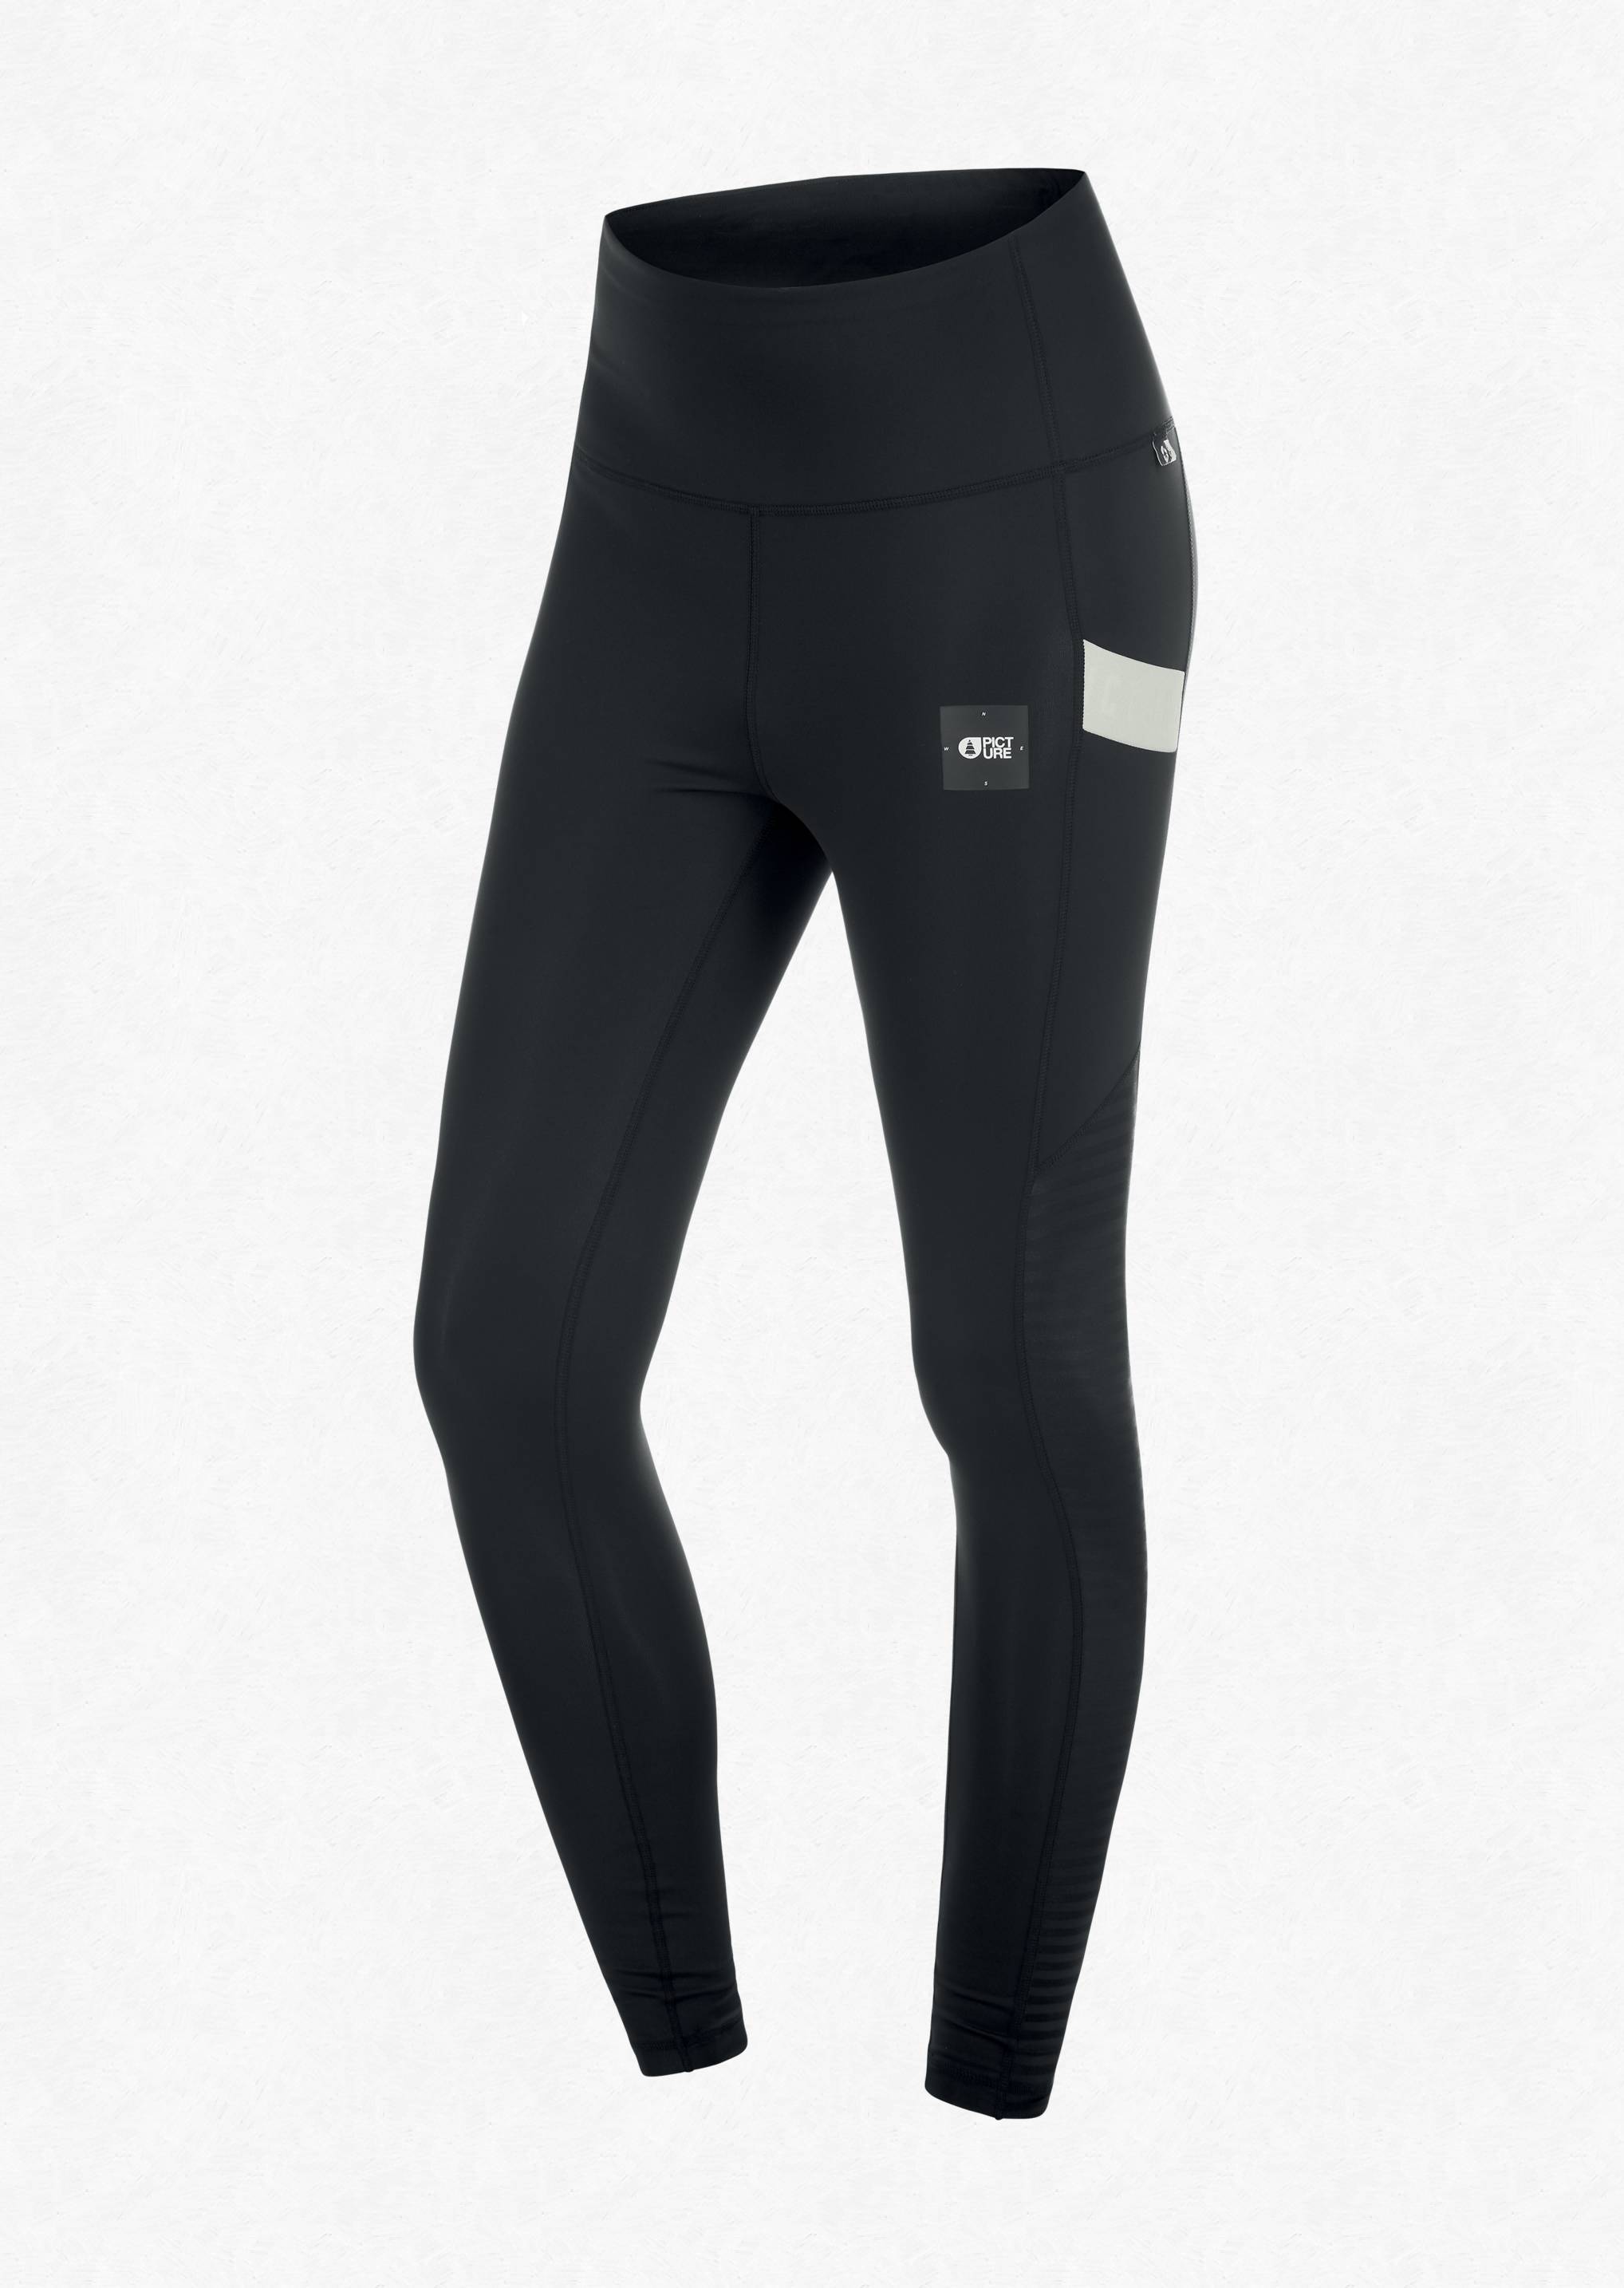 Picture Organic Women's Cintra Tech Leggings - Recycled Polyester, Black / M/L